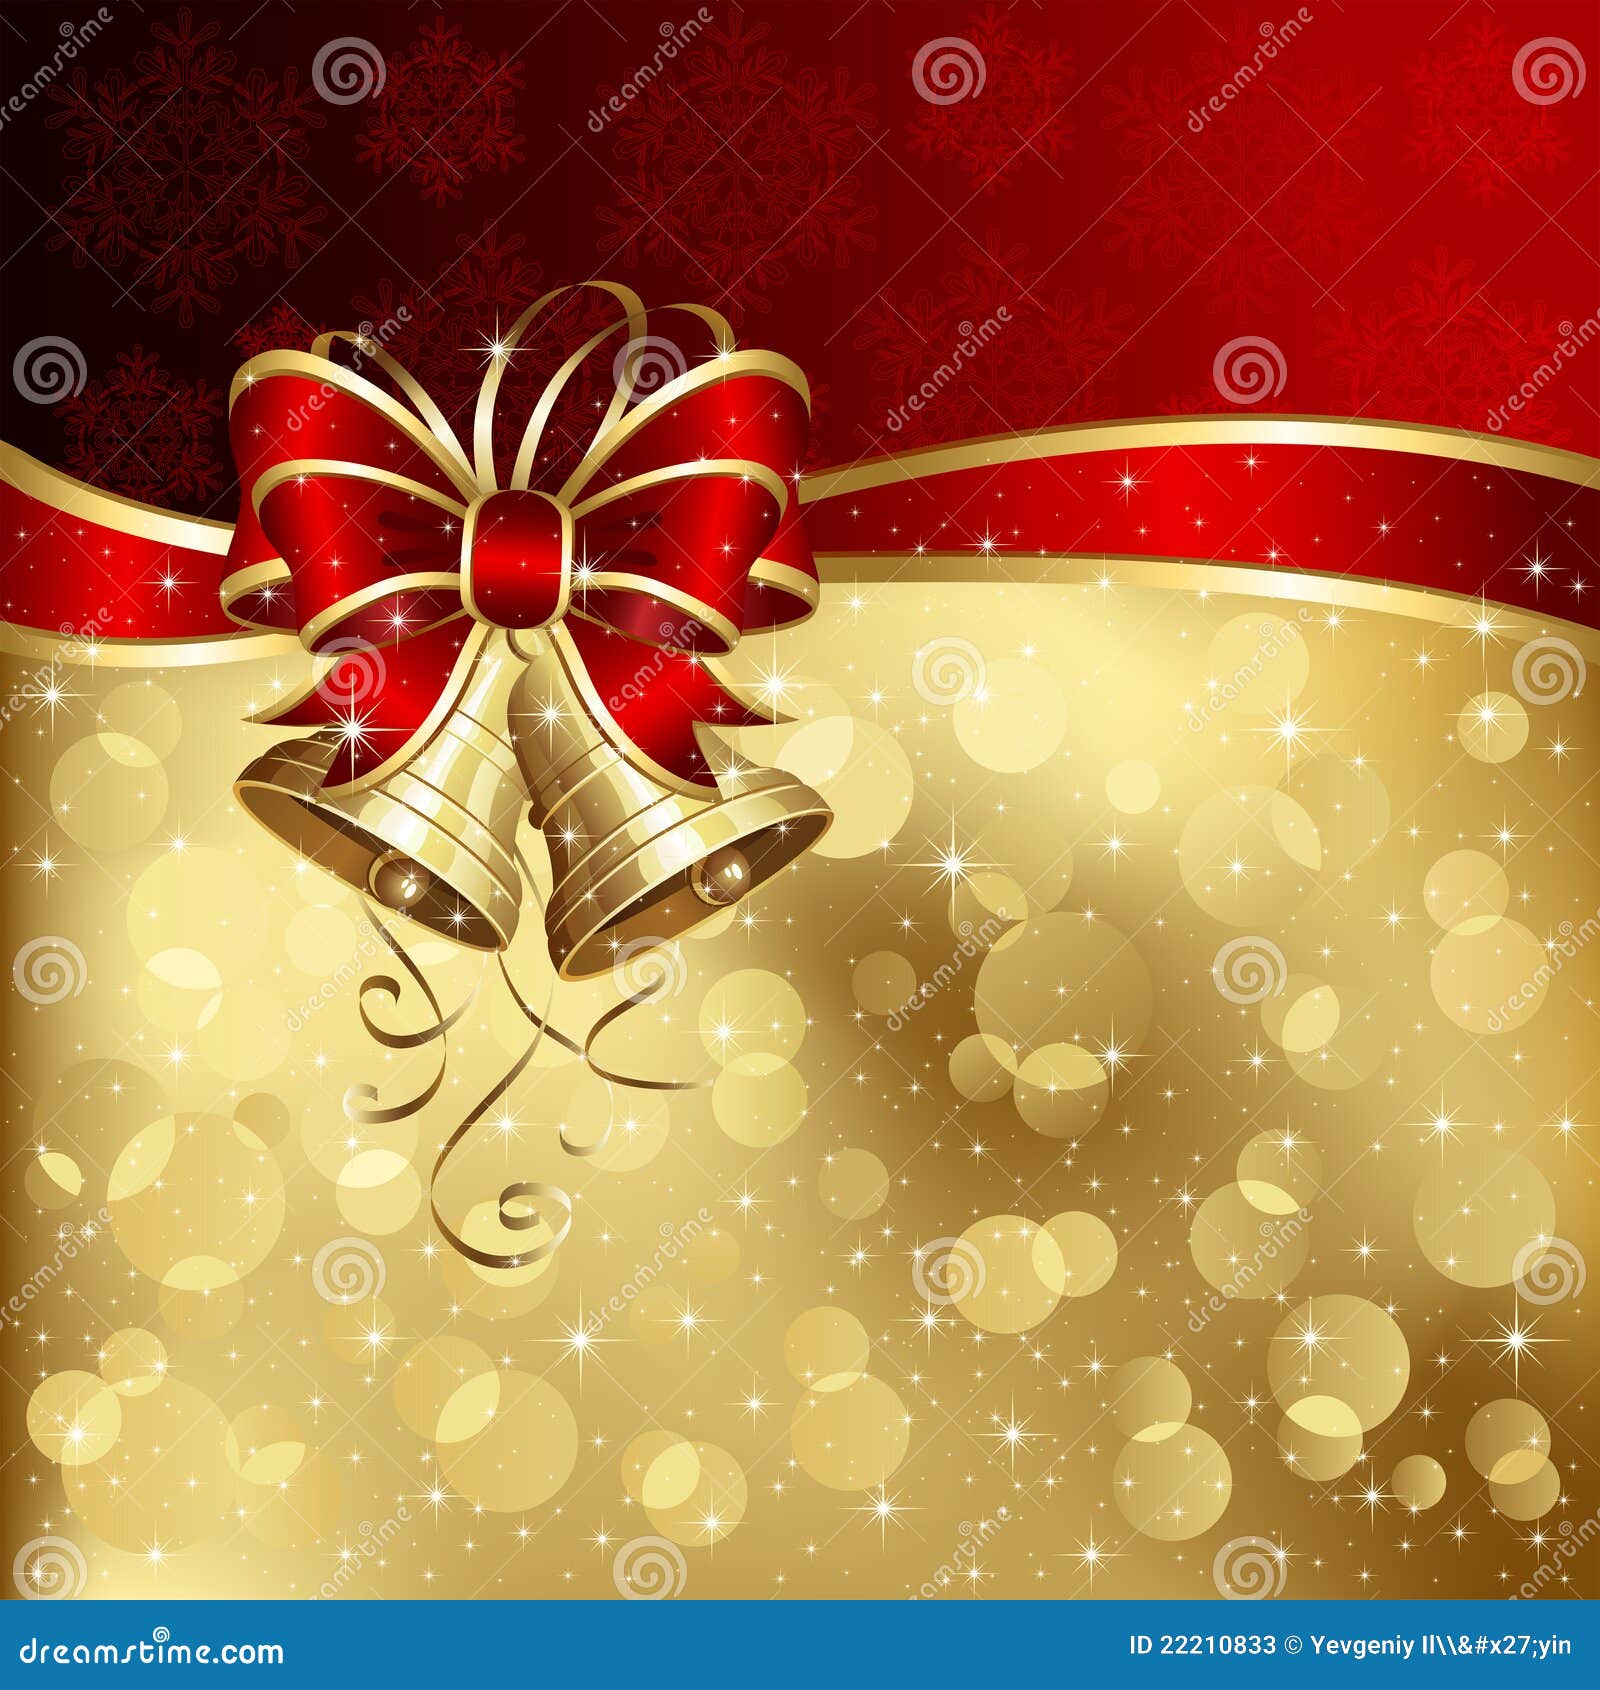 Christmas Card With Bells And Bow Stock Photos - Image 